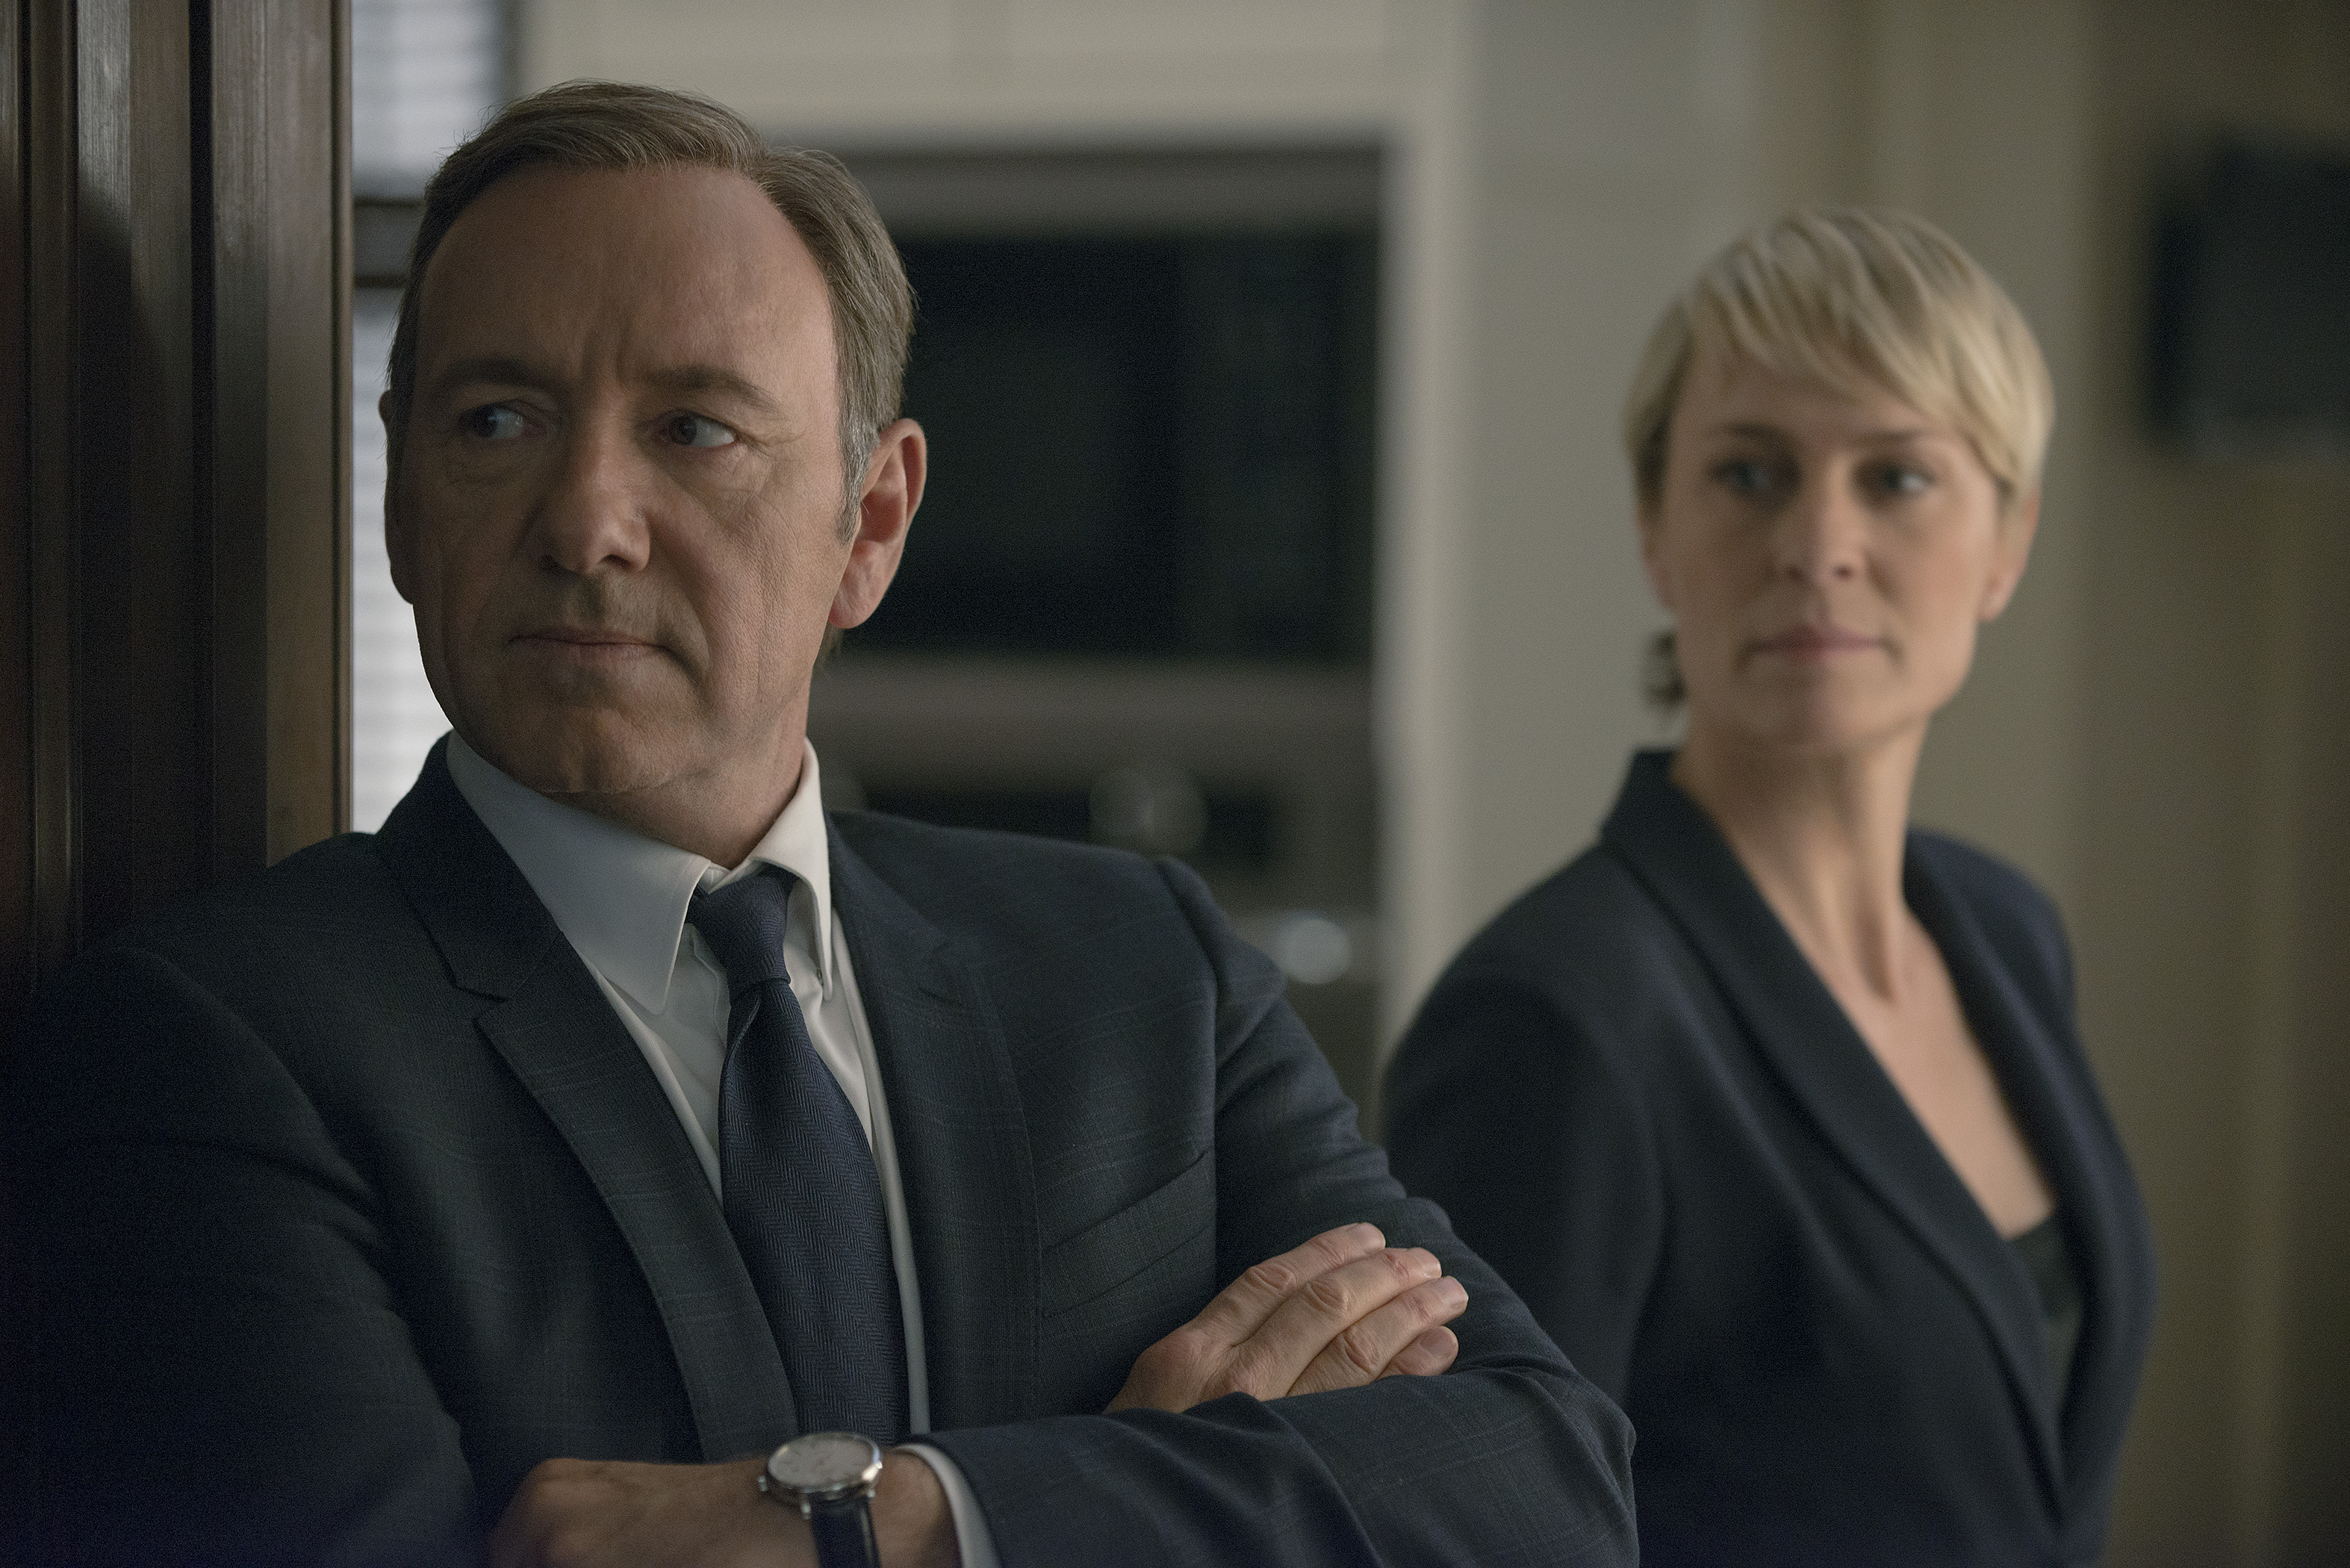 Drama series - House of Cards